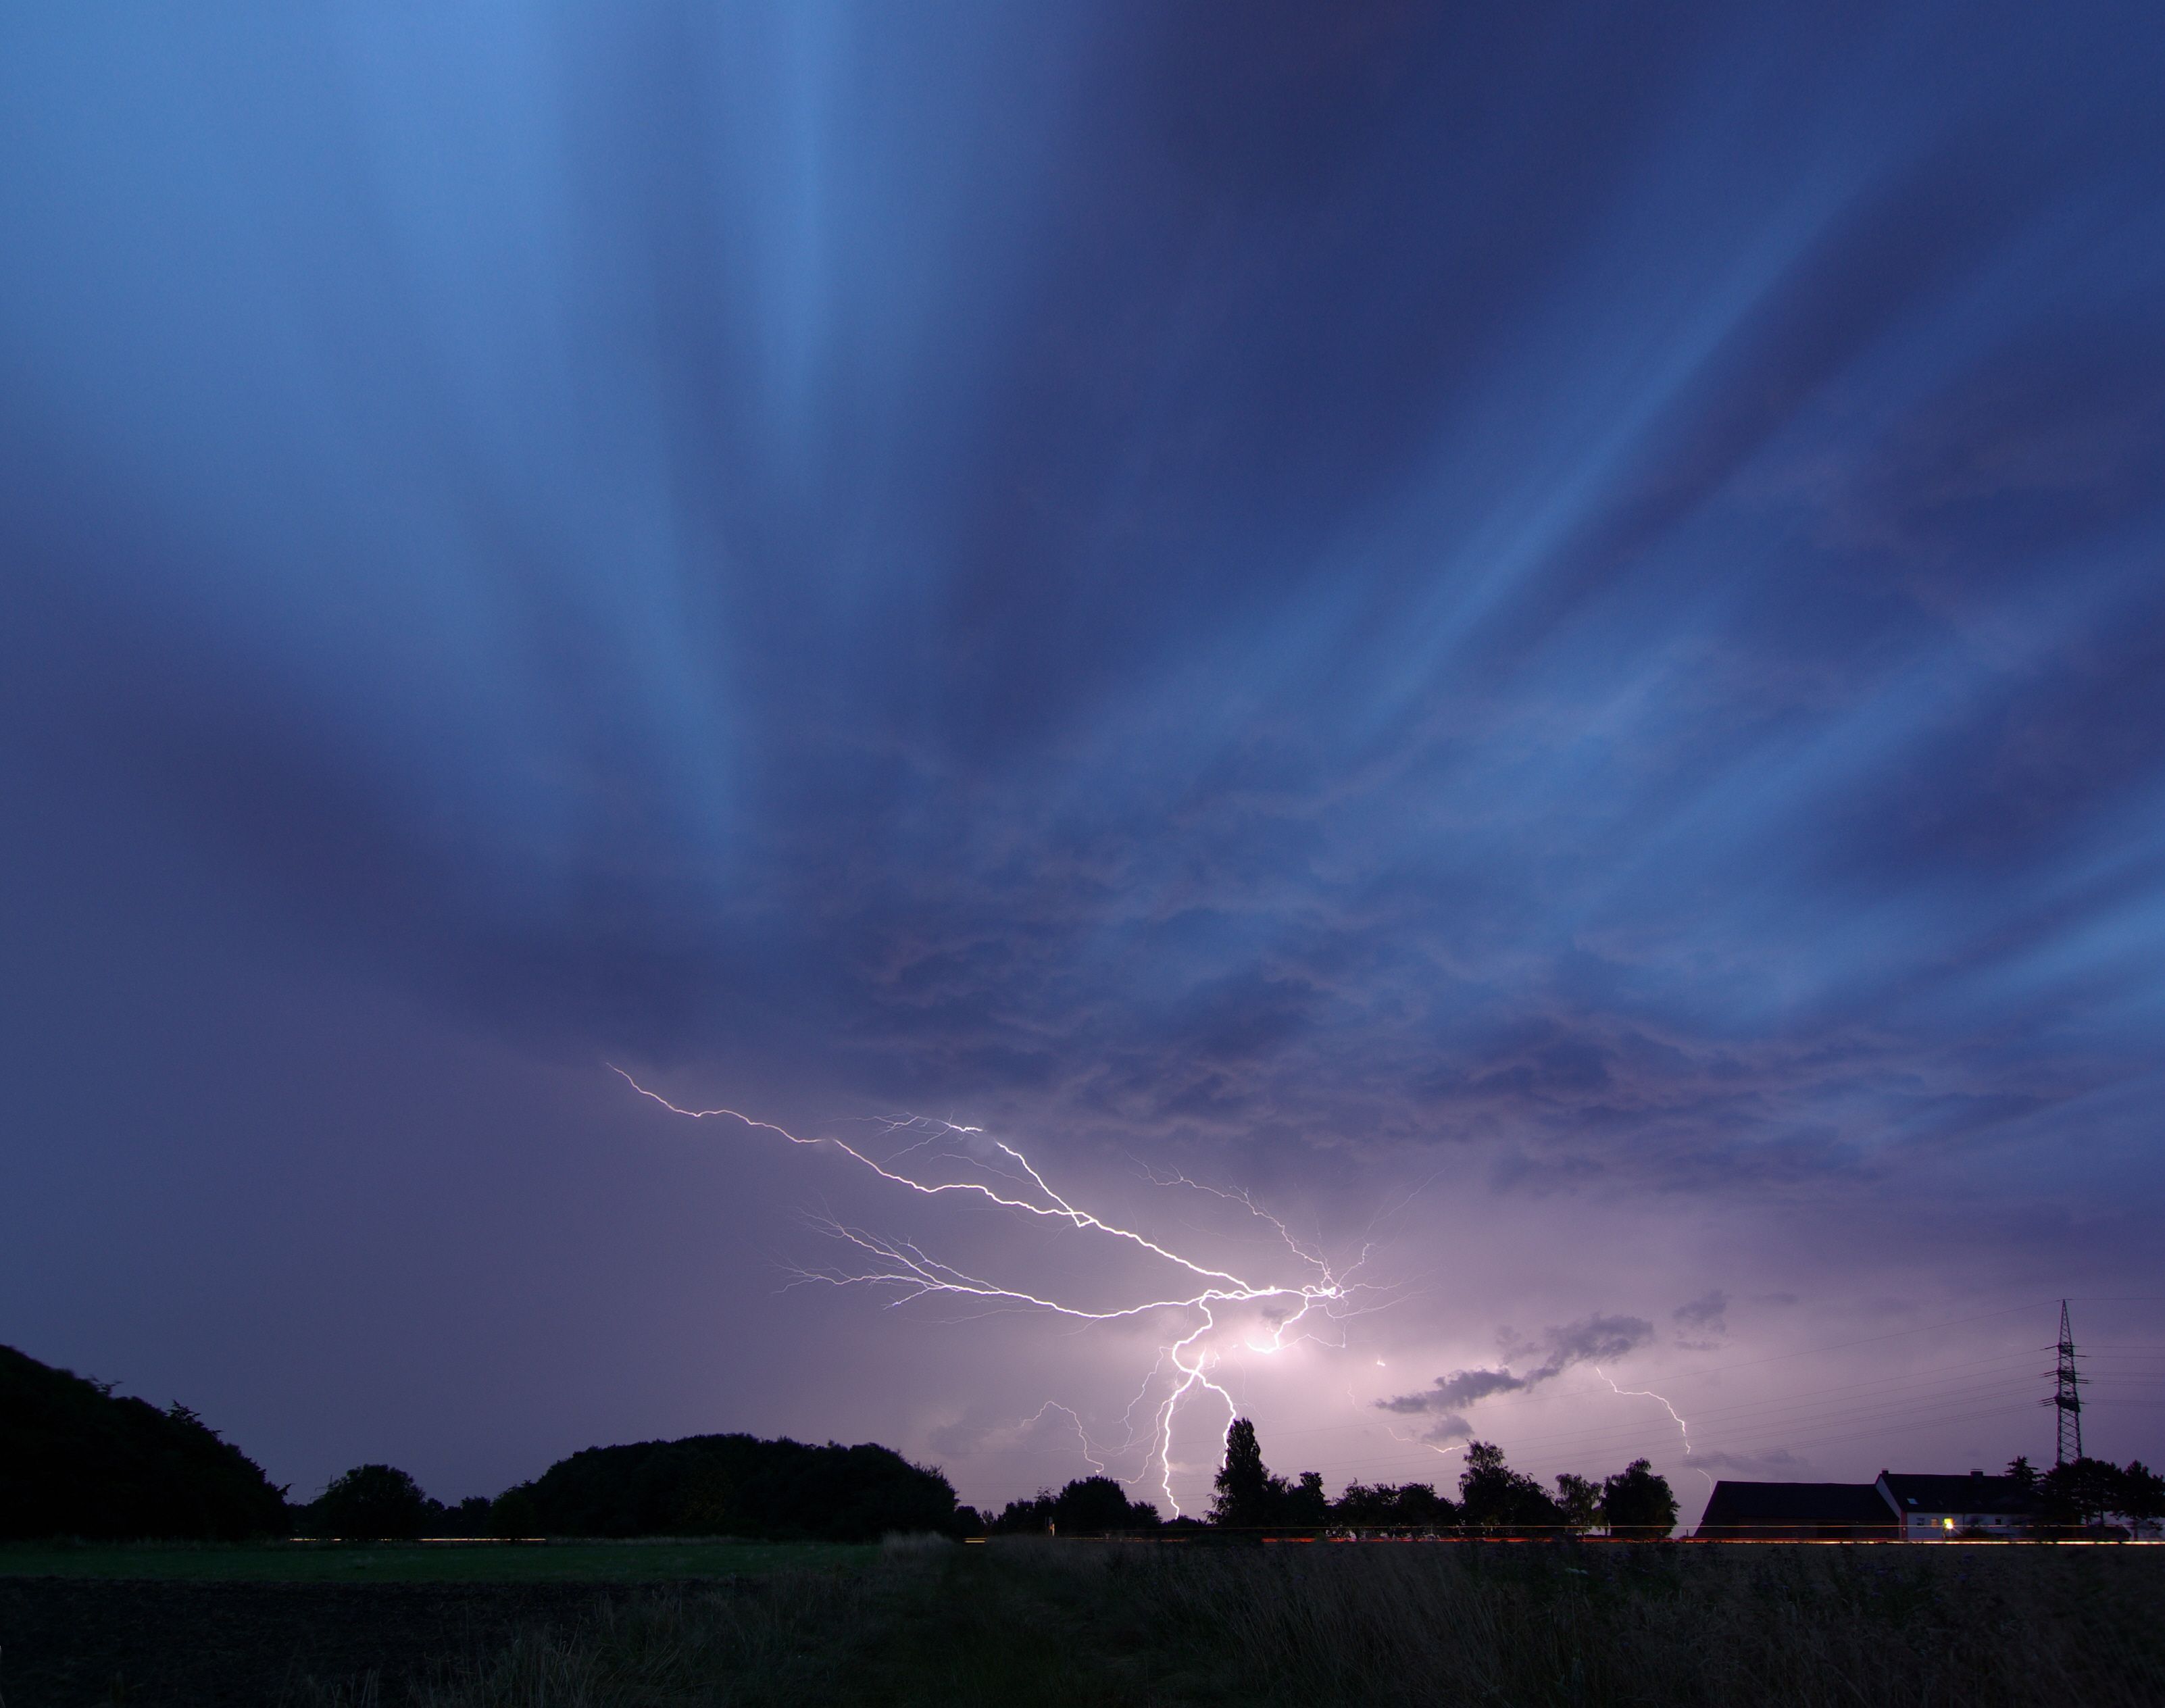 Heavy rain and thunderstorms on the way for much of Denmark